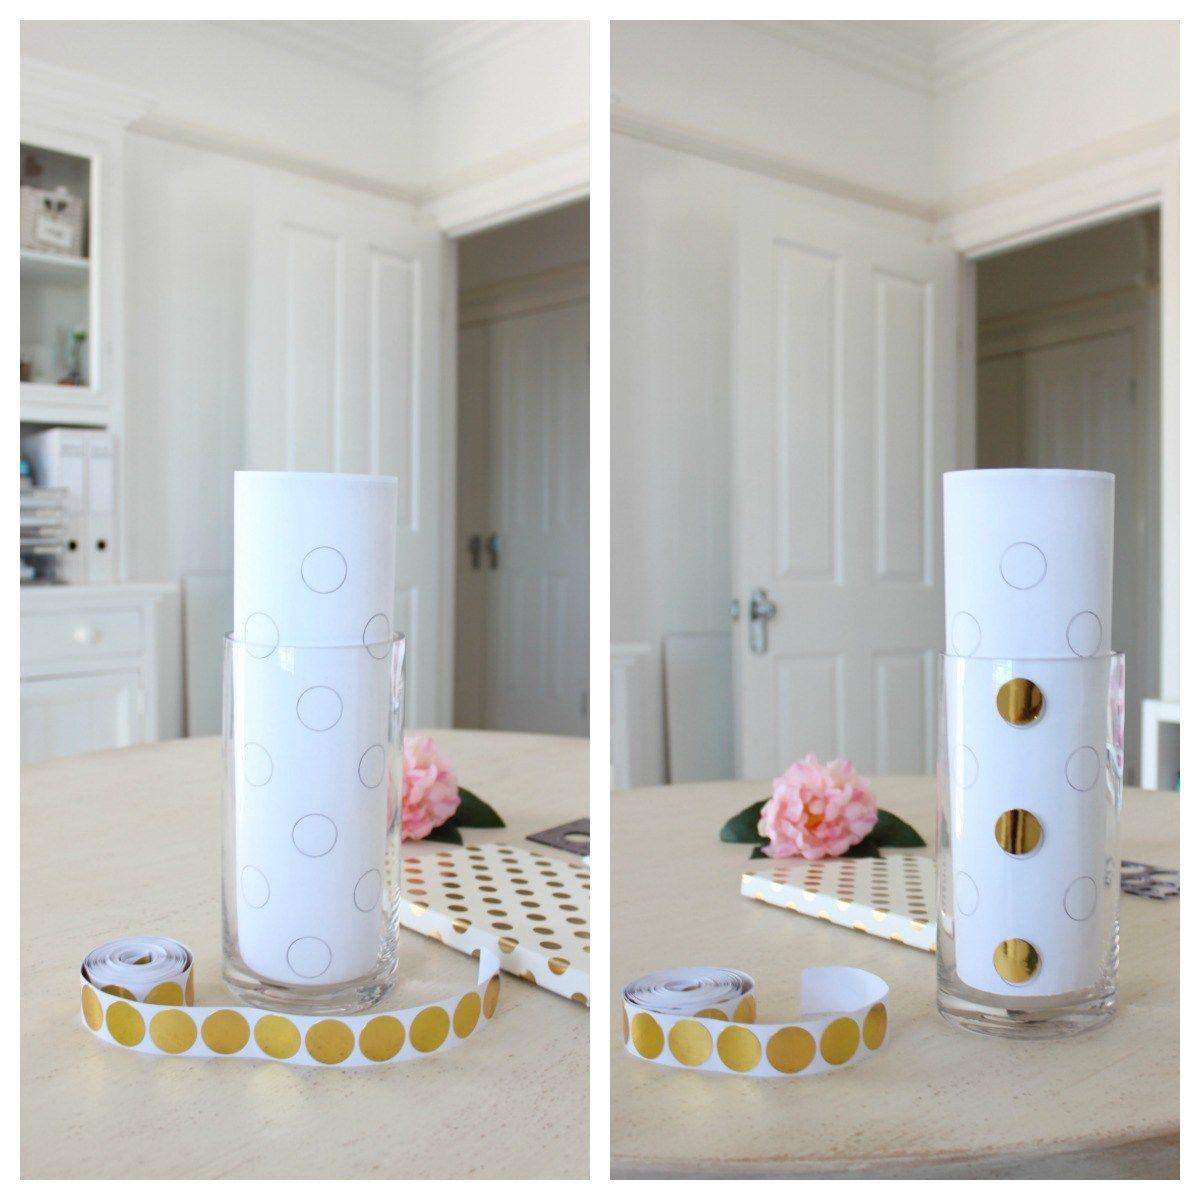 29 Perfect Kate Spade Pearl Place Vase 2024 free download kate spade pearl place vase of how to diy kate spade dots diy decor pinterest diy pertaining to how to diy kate spade dots just how does kate spade gets her dots to look so good ive worked i